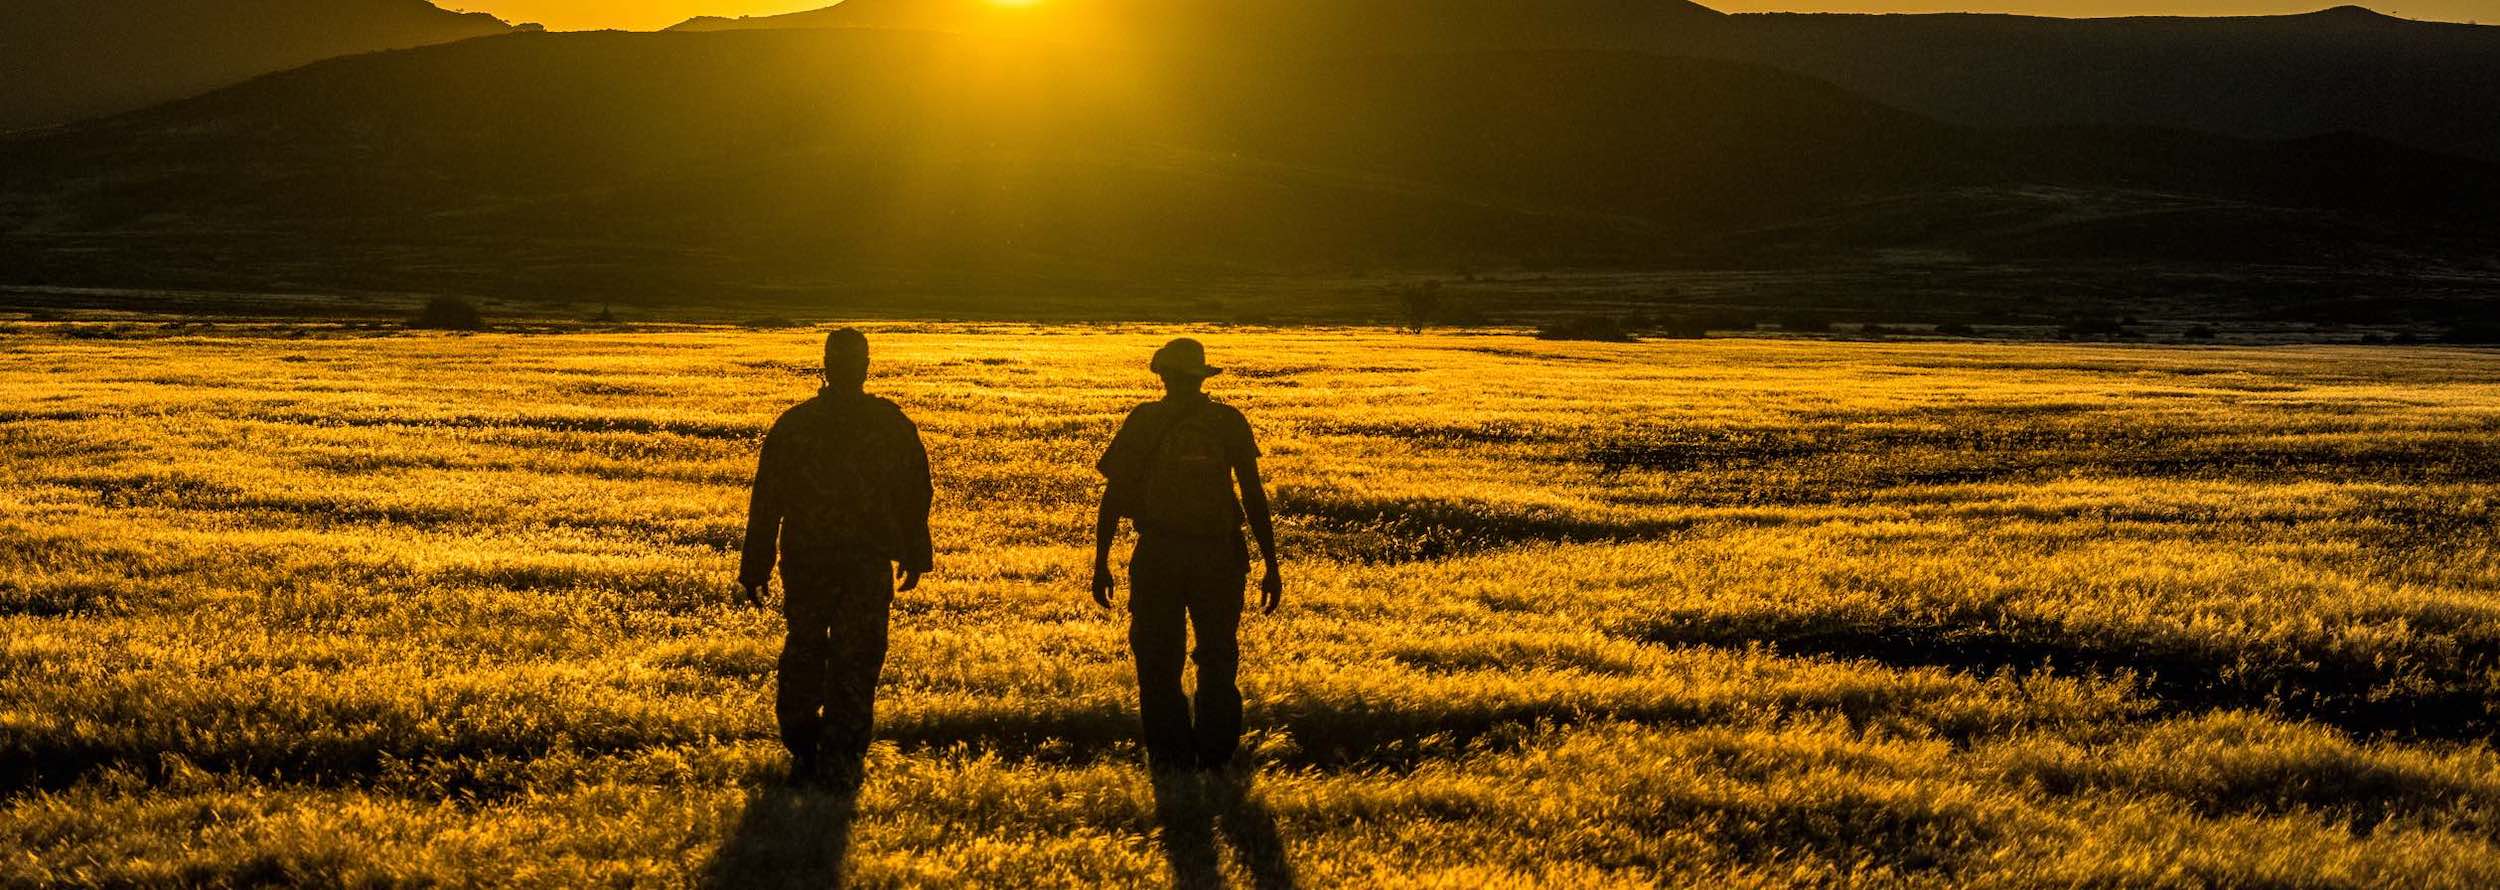 Two game rangers walk across a grassy plain. Ahead the sun is just visible above a mountain range.